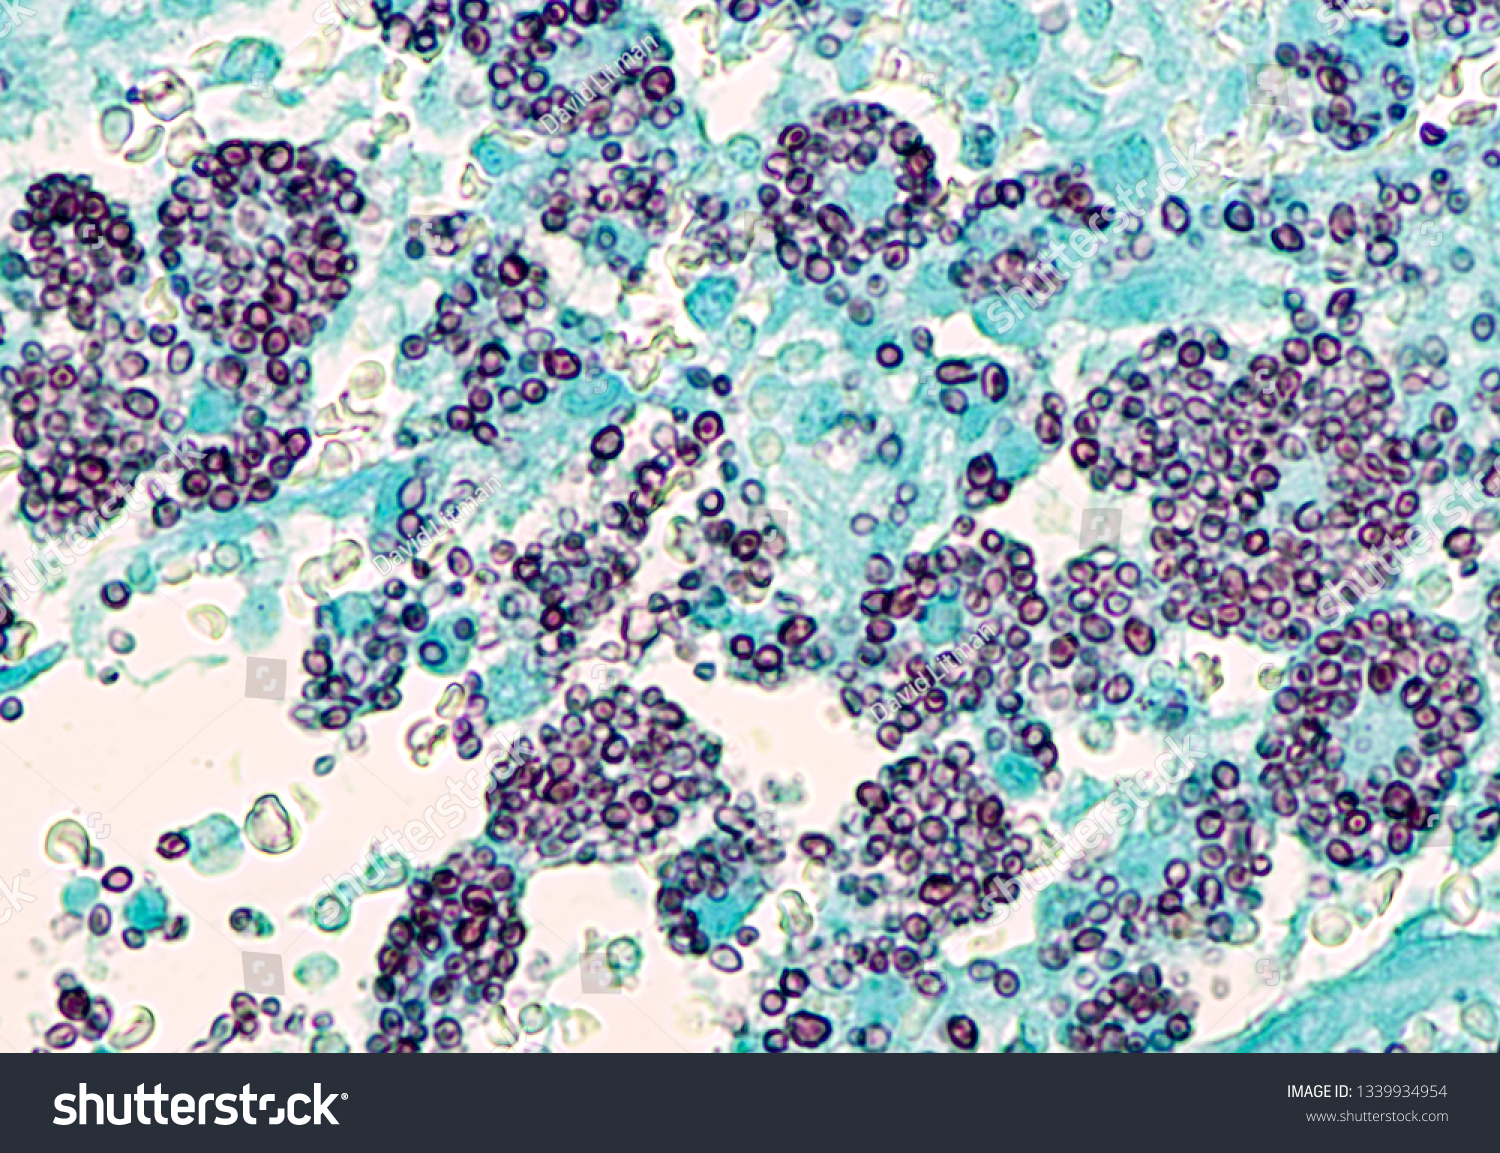 Microscopic of disseminated histoplasmosis, a type of fungal infection  by the fungus Histoplasma capsulatum.  Yeast forms appear as black  spherules within the cytoplasm of macrophages. GMS stain.  #1339934954